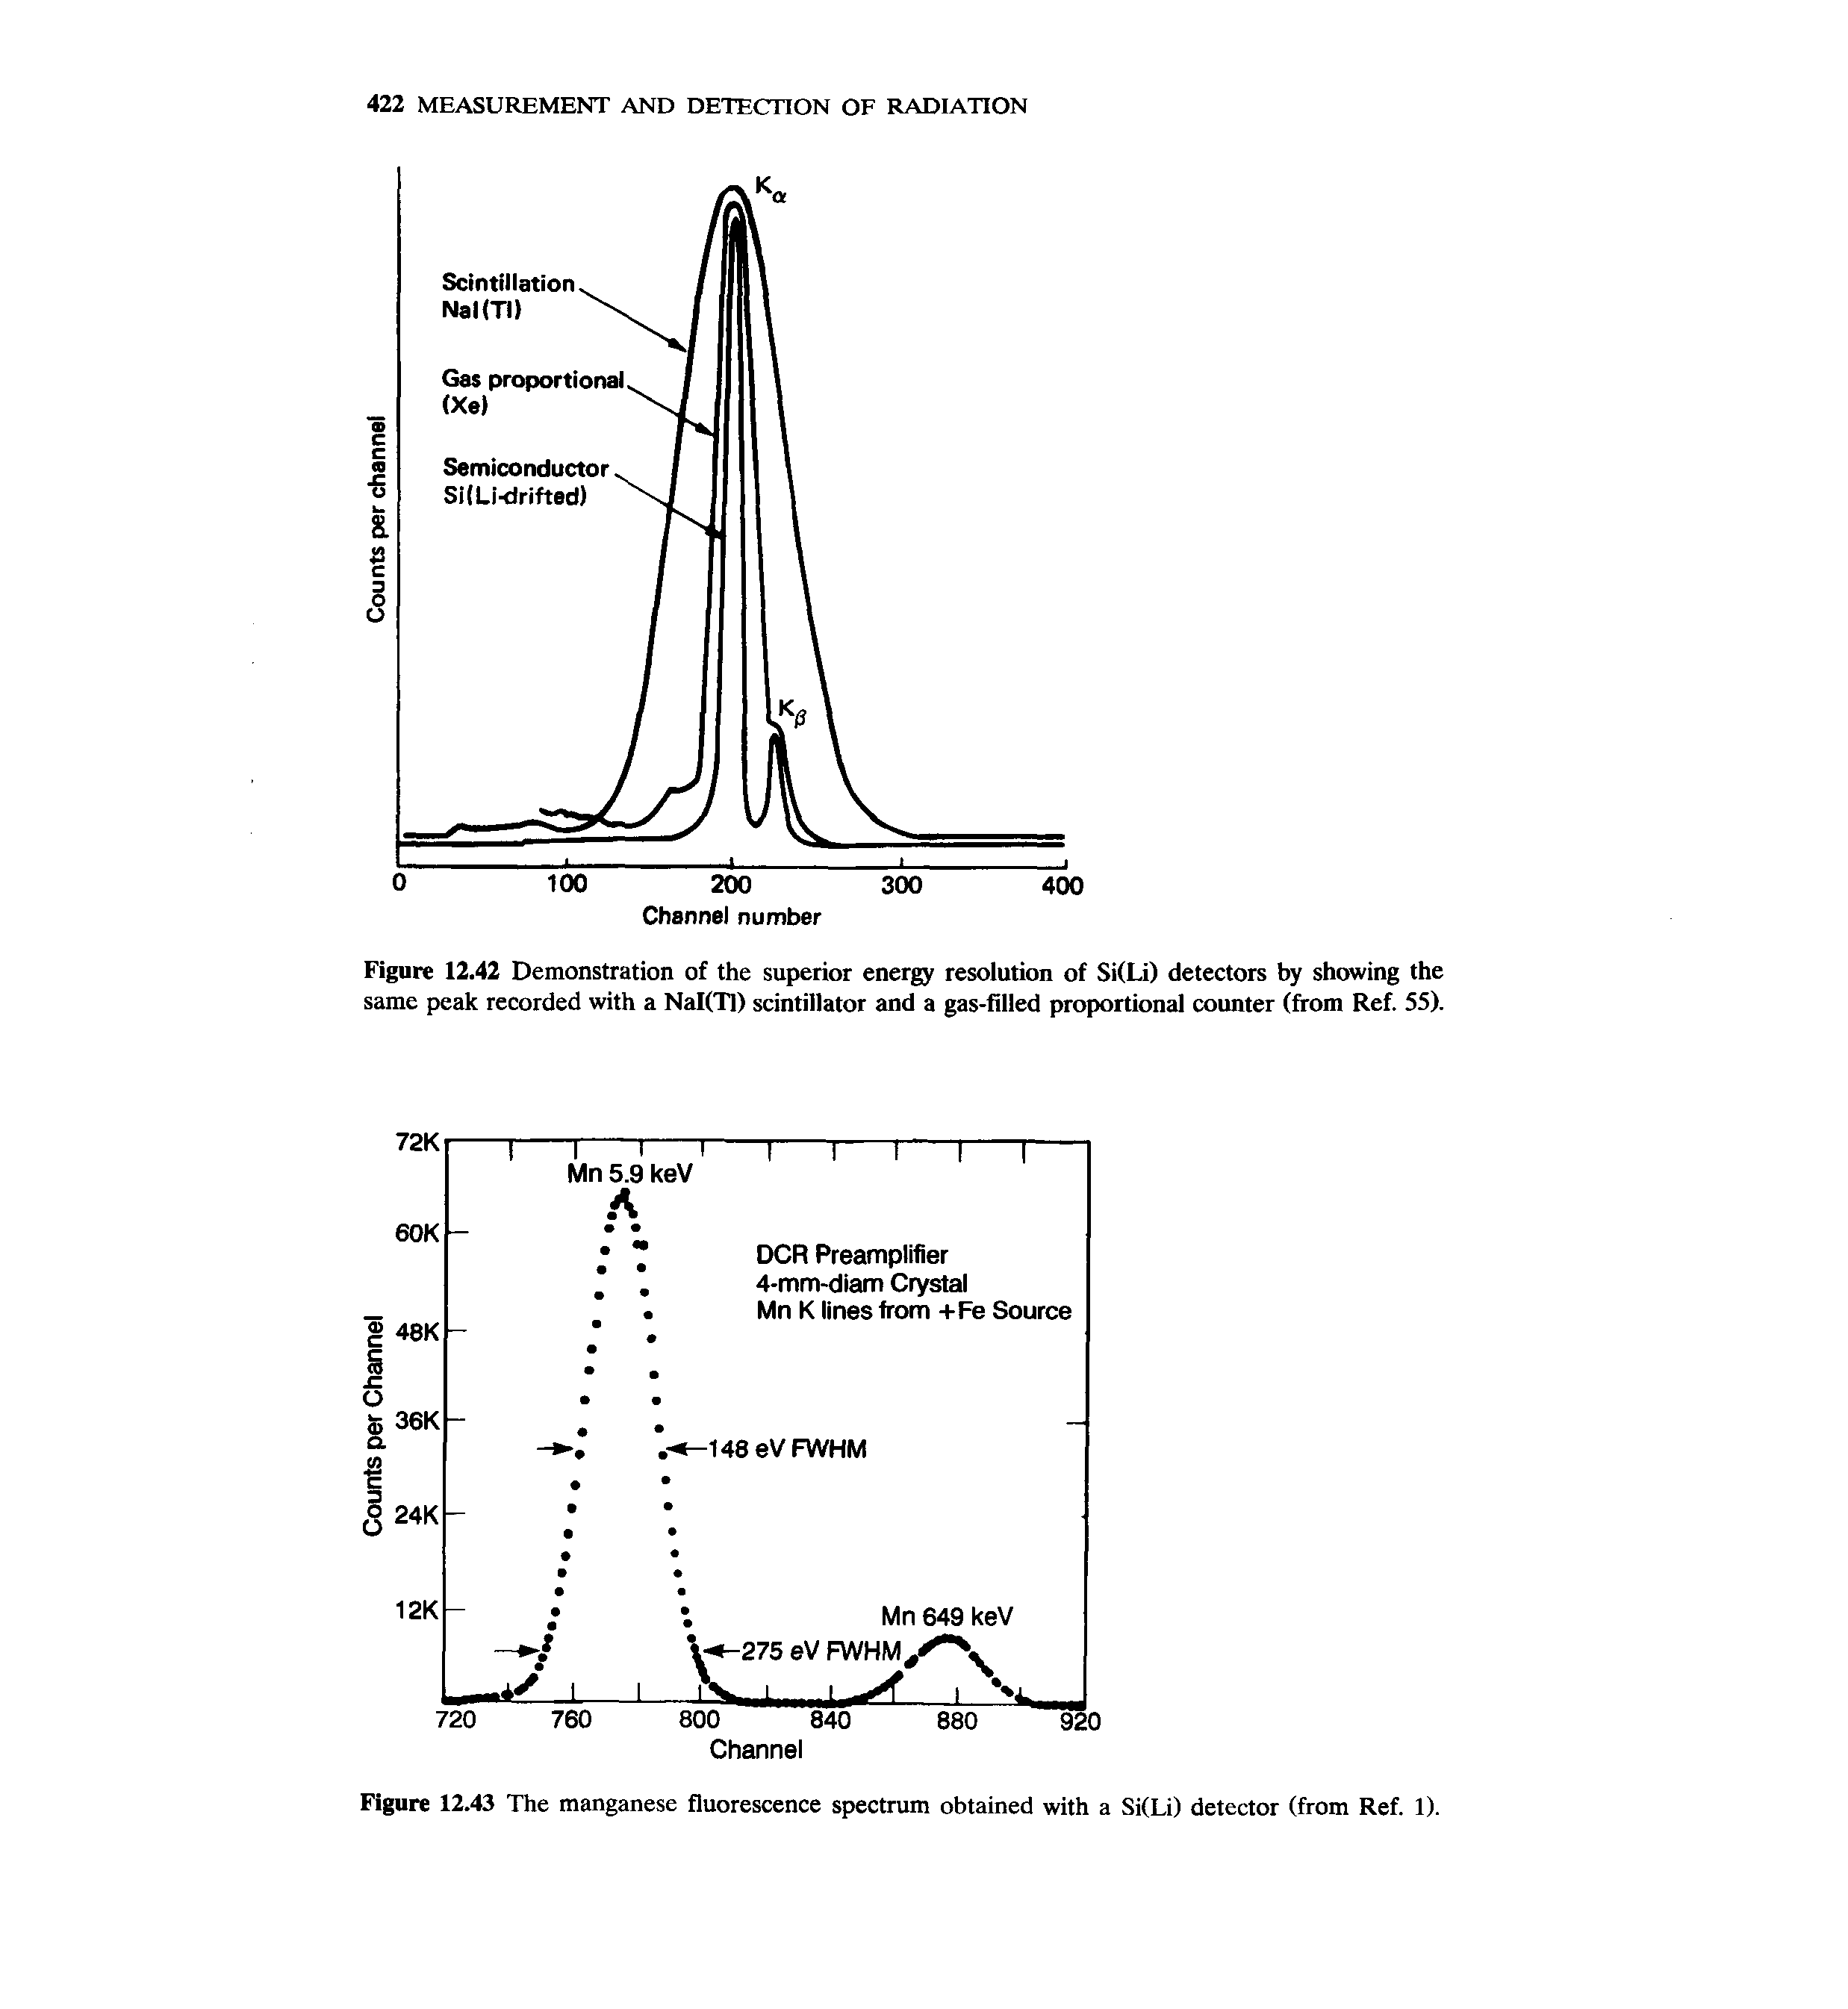 Figure 12.42 Demonstration of the superior energy resolution of Si(Li) detectors by showing the same peak recorded with a NaKTl) scintillator and a gas-filled proportional counter (from Ref. 55).